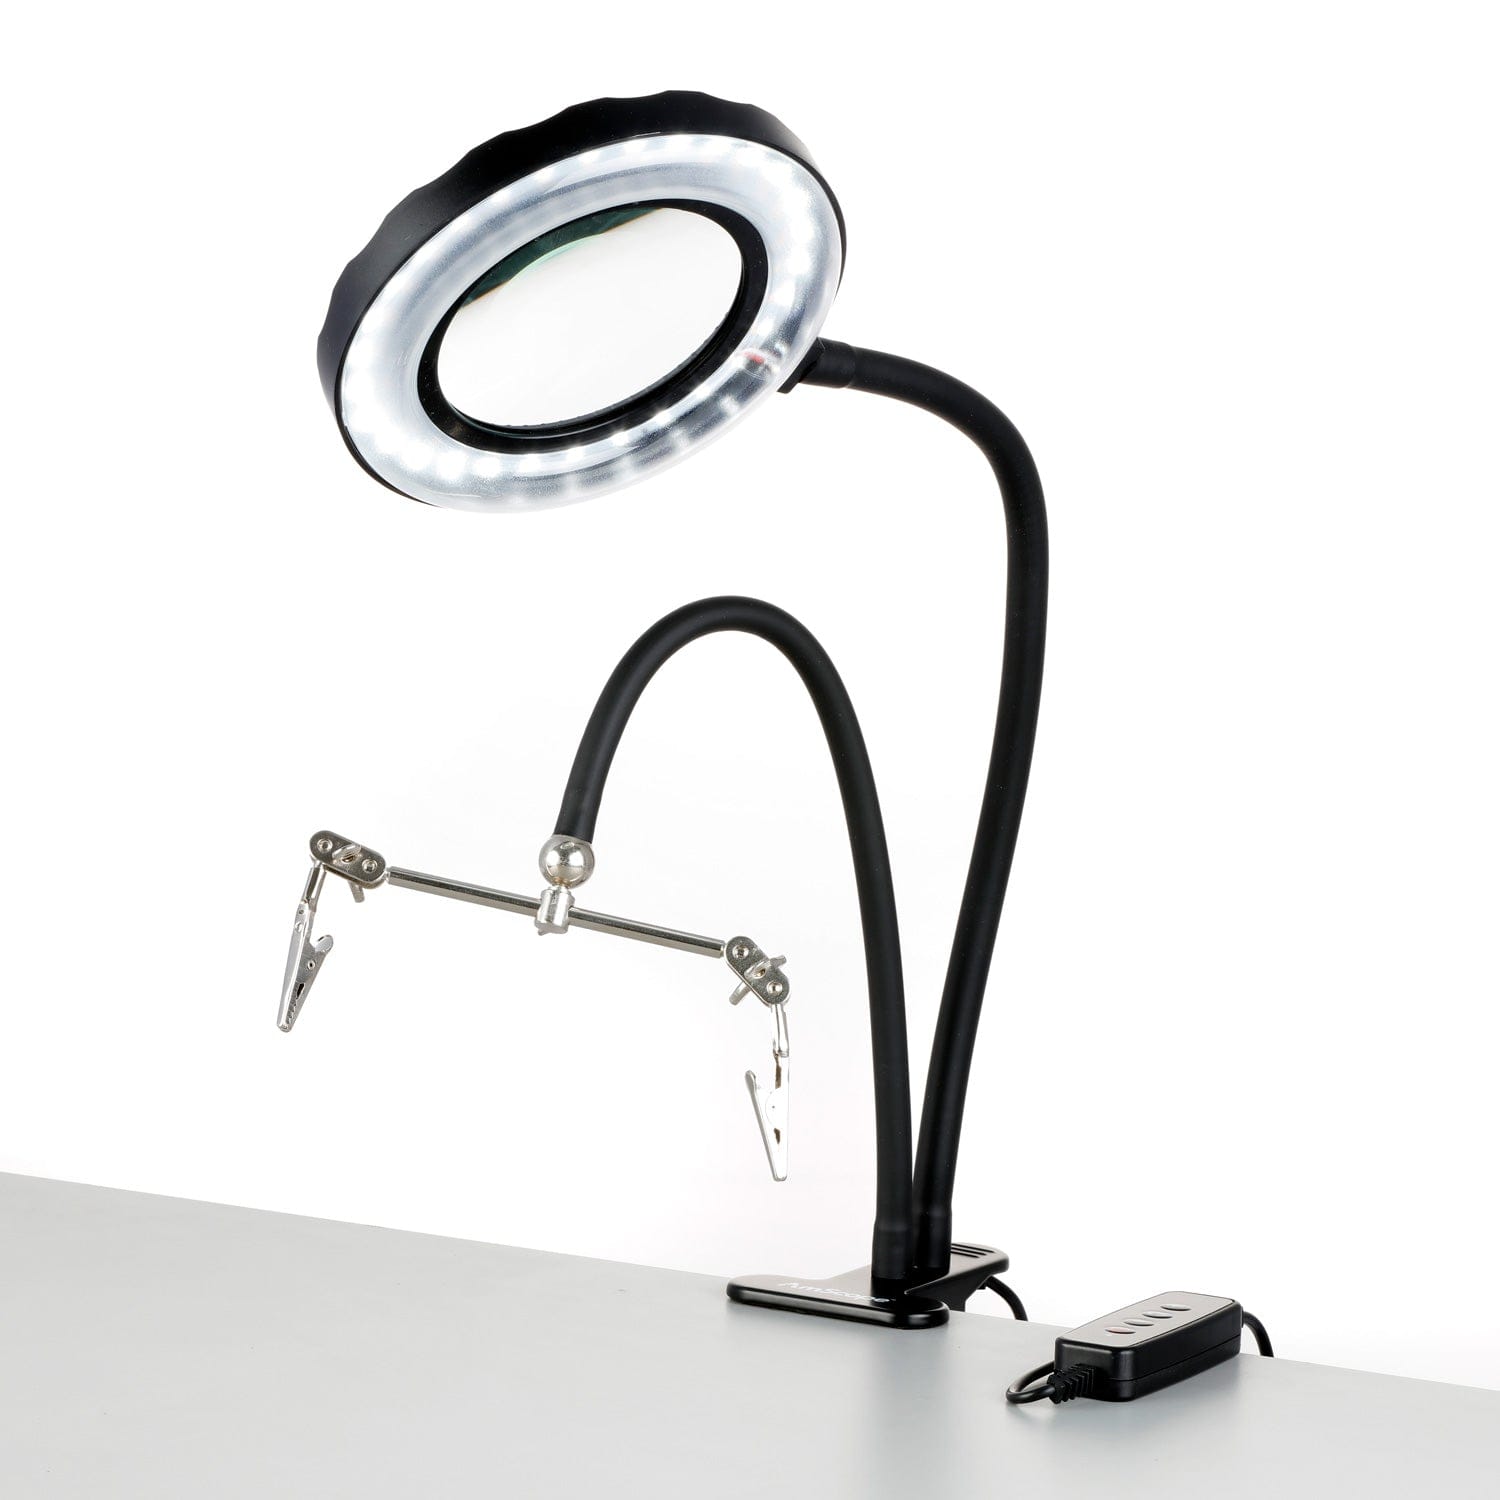 Abody Pro Flexible Hands Free Magnifying Glass Desk Lamp Bright LED Lighted  Magnifier with Clamp for Reading Cross Stitch 